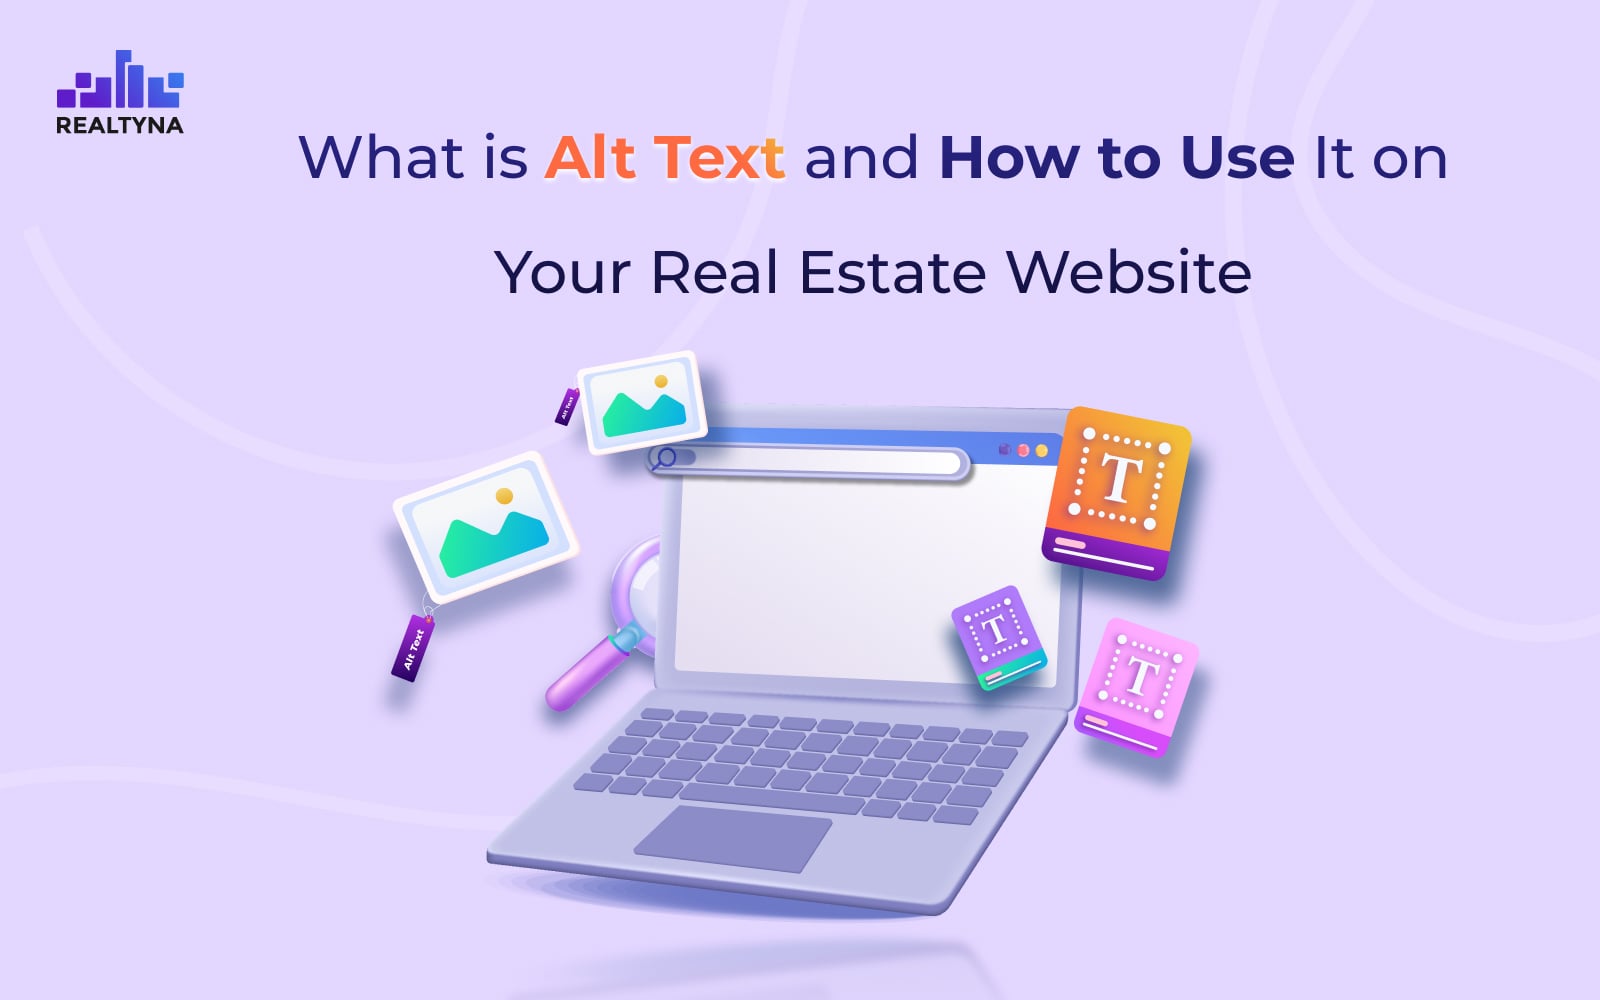 What is Alt Text and How to Use It on Your Real Estate Website